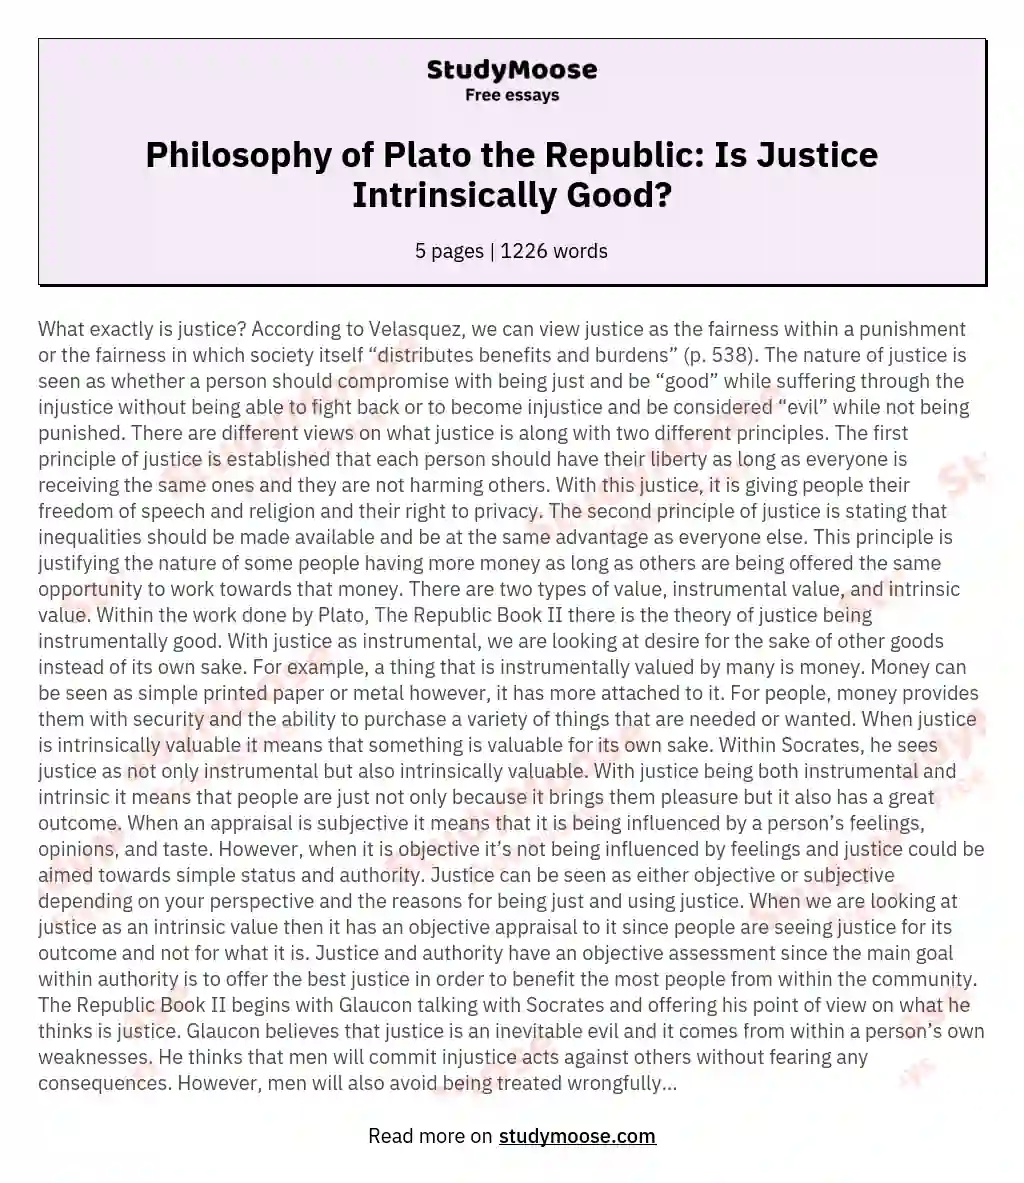 Philosophy of Plato the Republic: Is Justice Intrinsically Good? essay